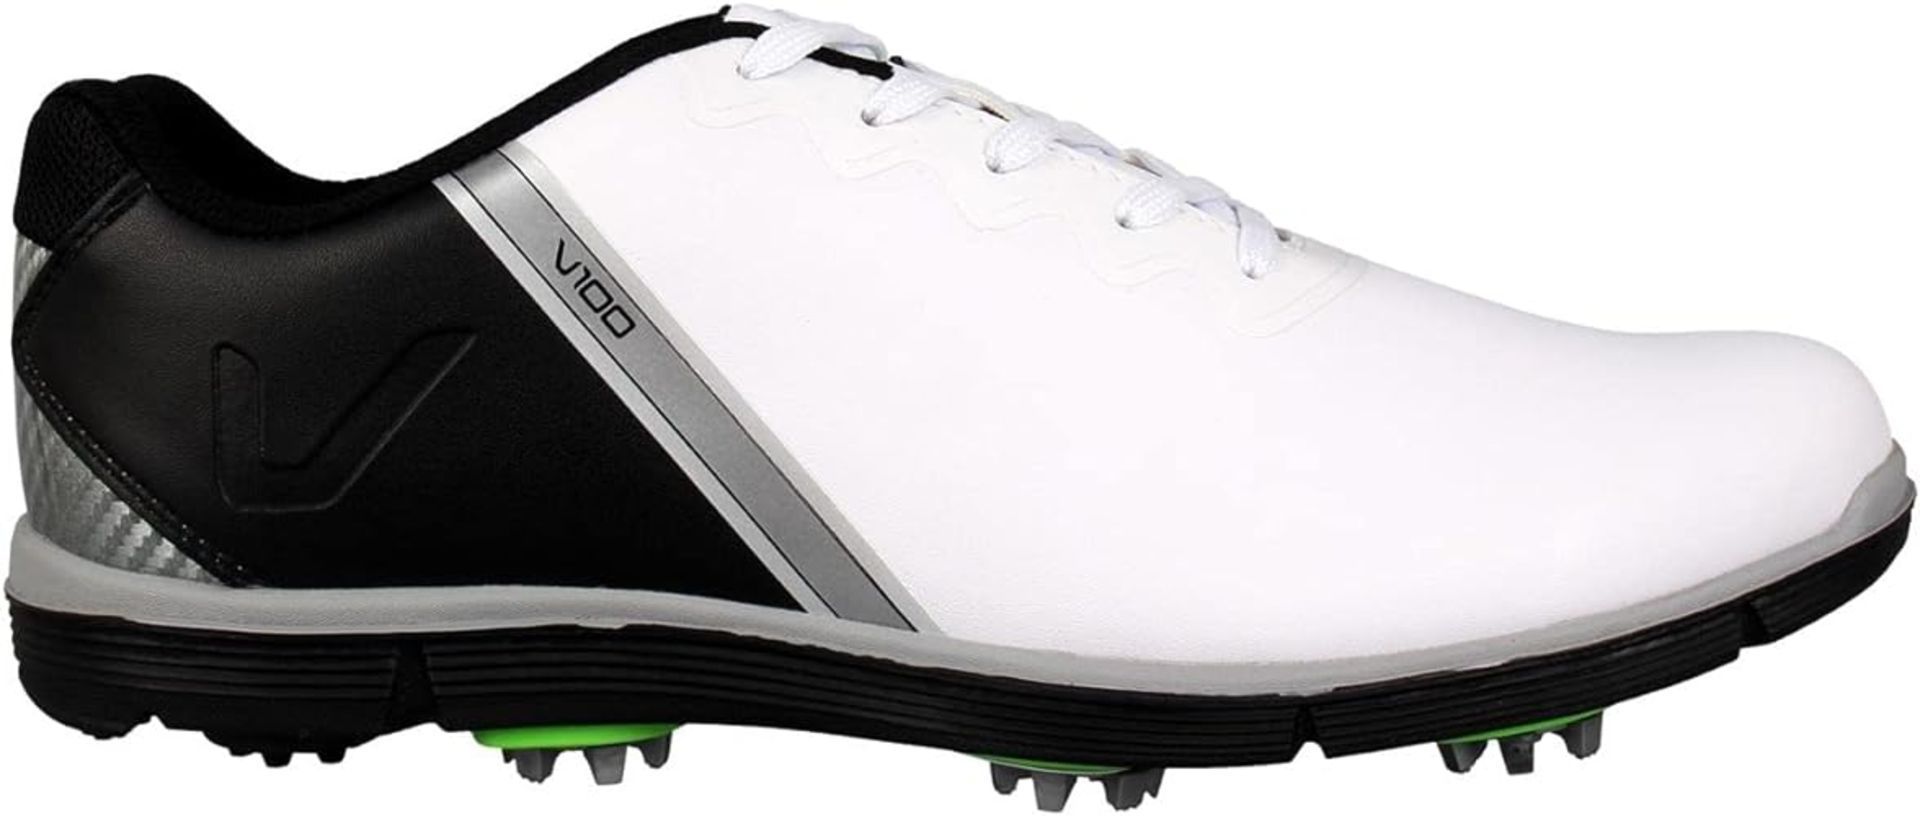 2 X BRAND NEW PAIRS OF SLAZENGER V100 PROFESSIONAL GOLF SHOES SIZE 8 RRP £89 EACH S1RA - Image 4 of 5